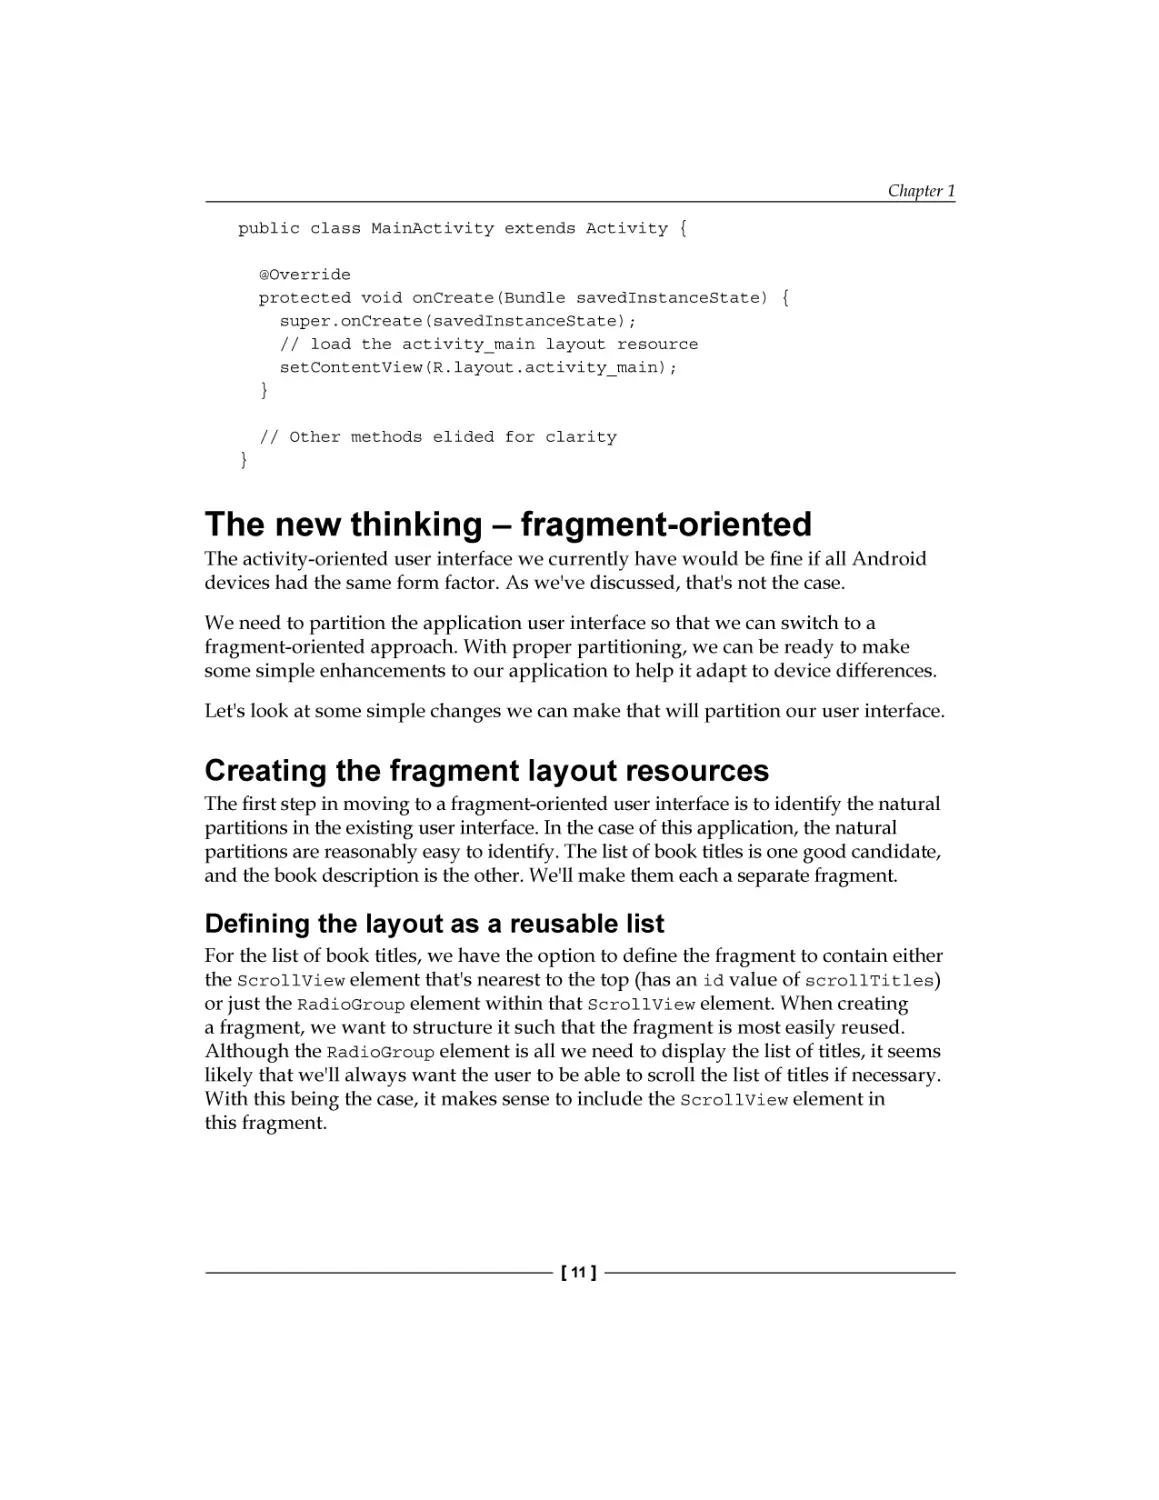 The new thinking – fragment-oriented
Creating the fragment layout resources